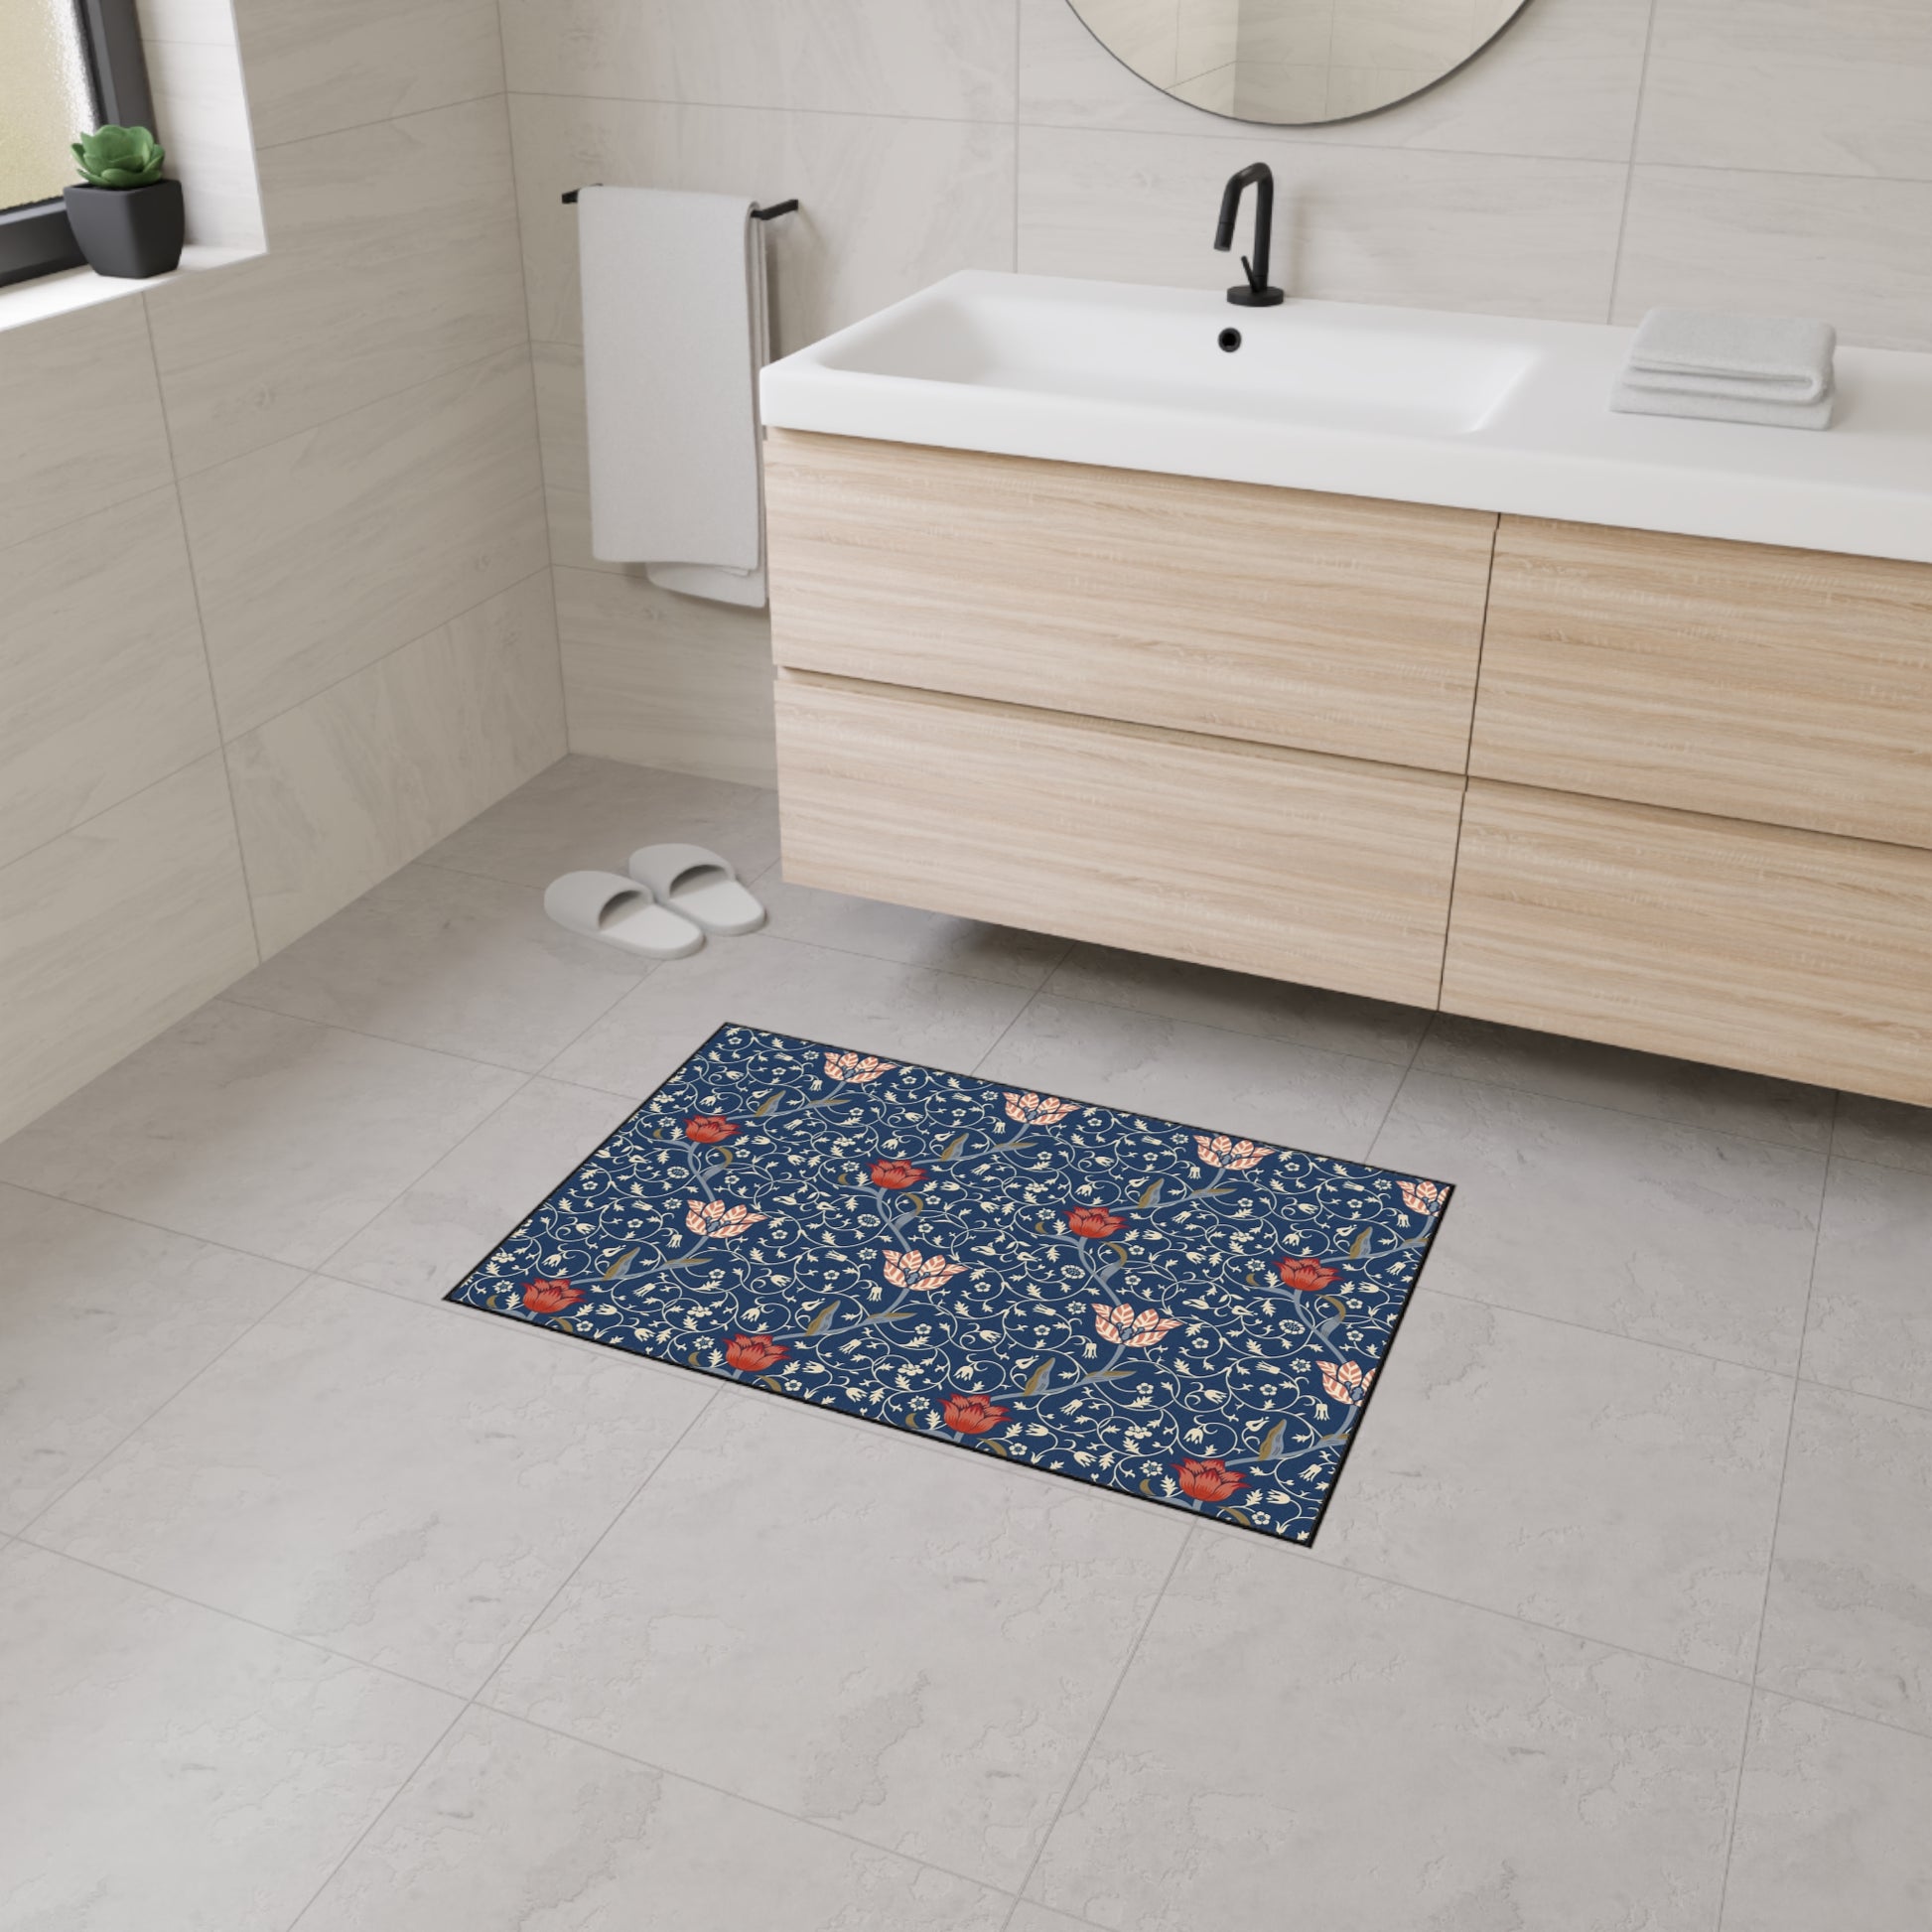 william-morris-co-heavy-duty-floor-mat-medway-collection-12